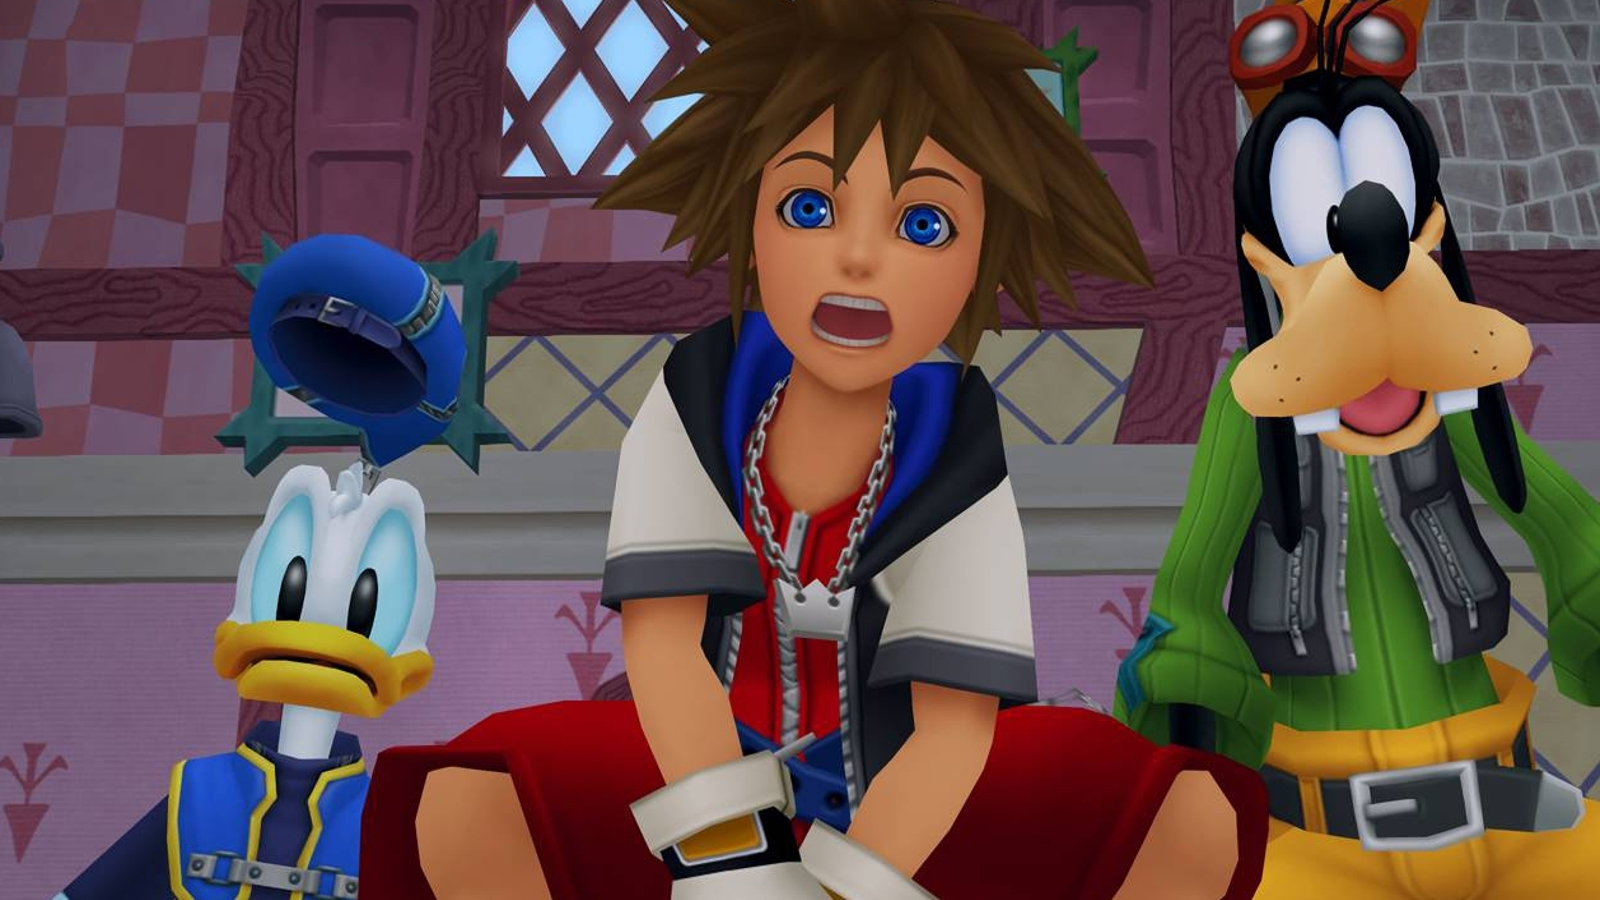 Kingdom Hearts: The Story So Far bundles up (almost) every game in